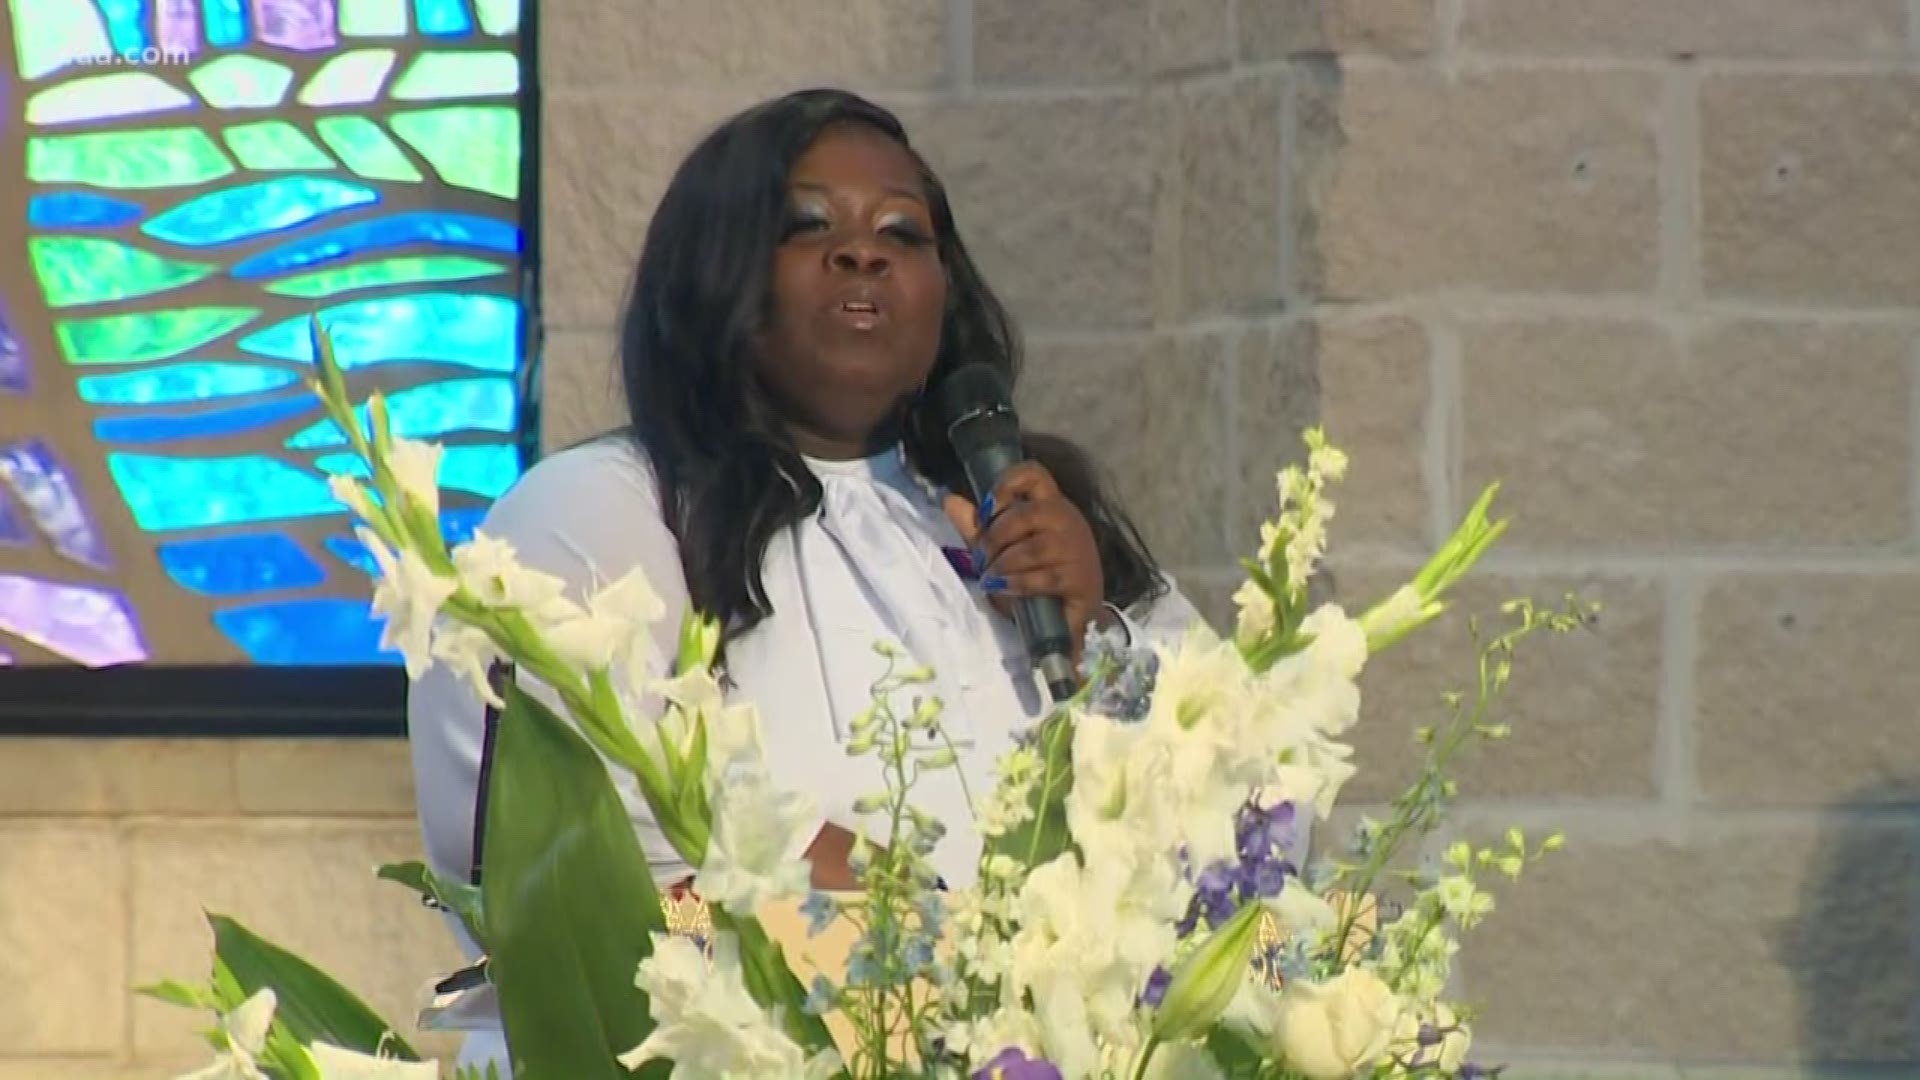 Funeral services for the 22-year-old transgender woman were held at the Cathedral of Hope in Dallas Tuesday.